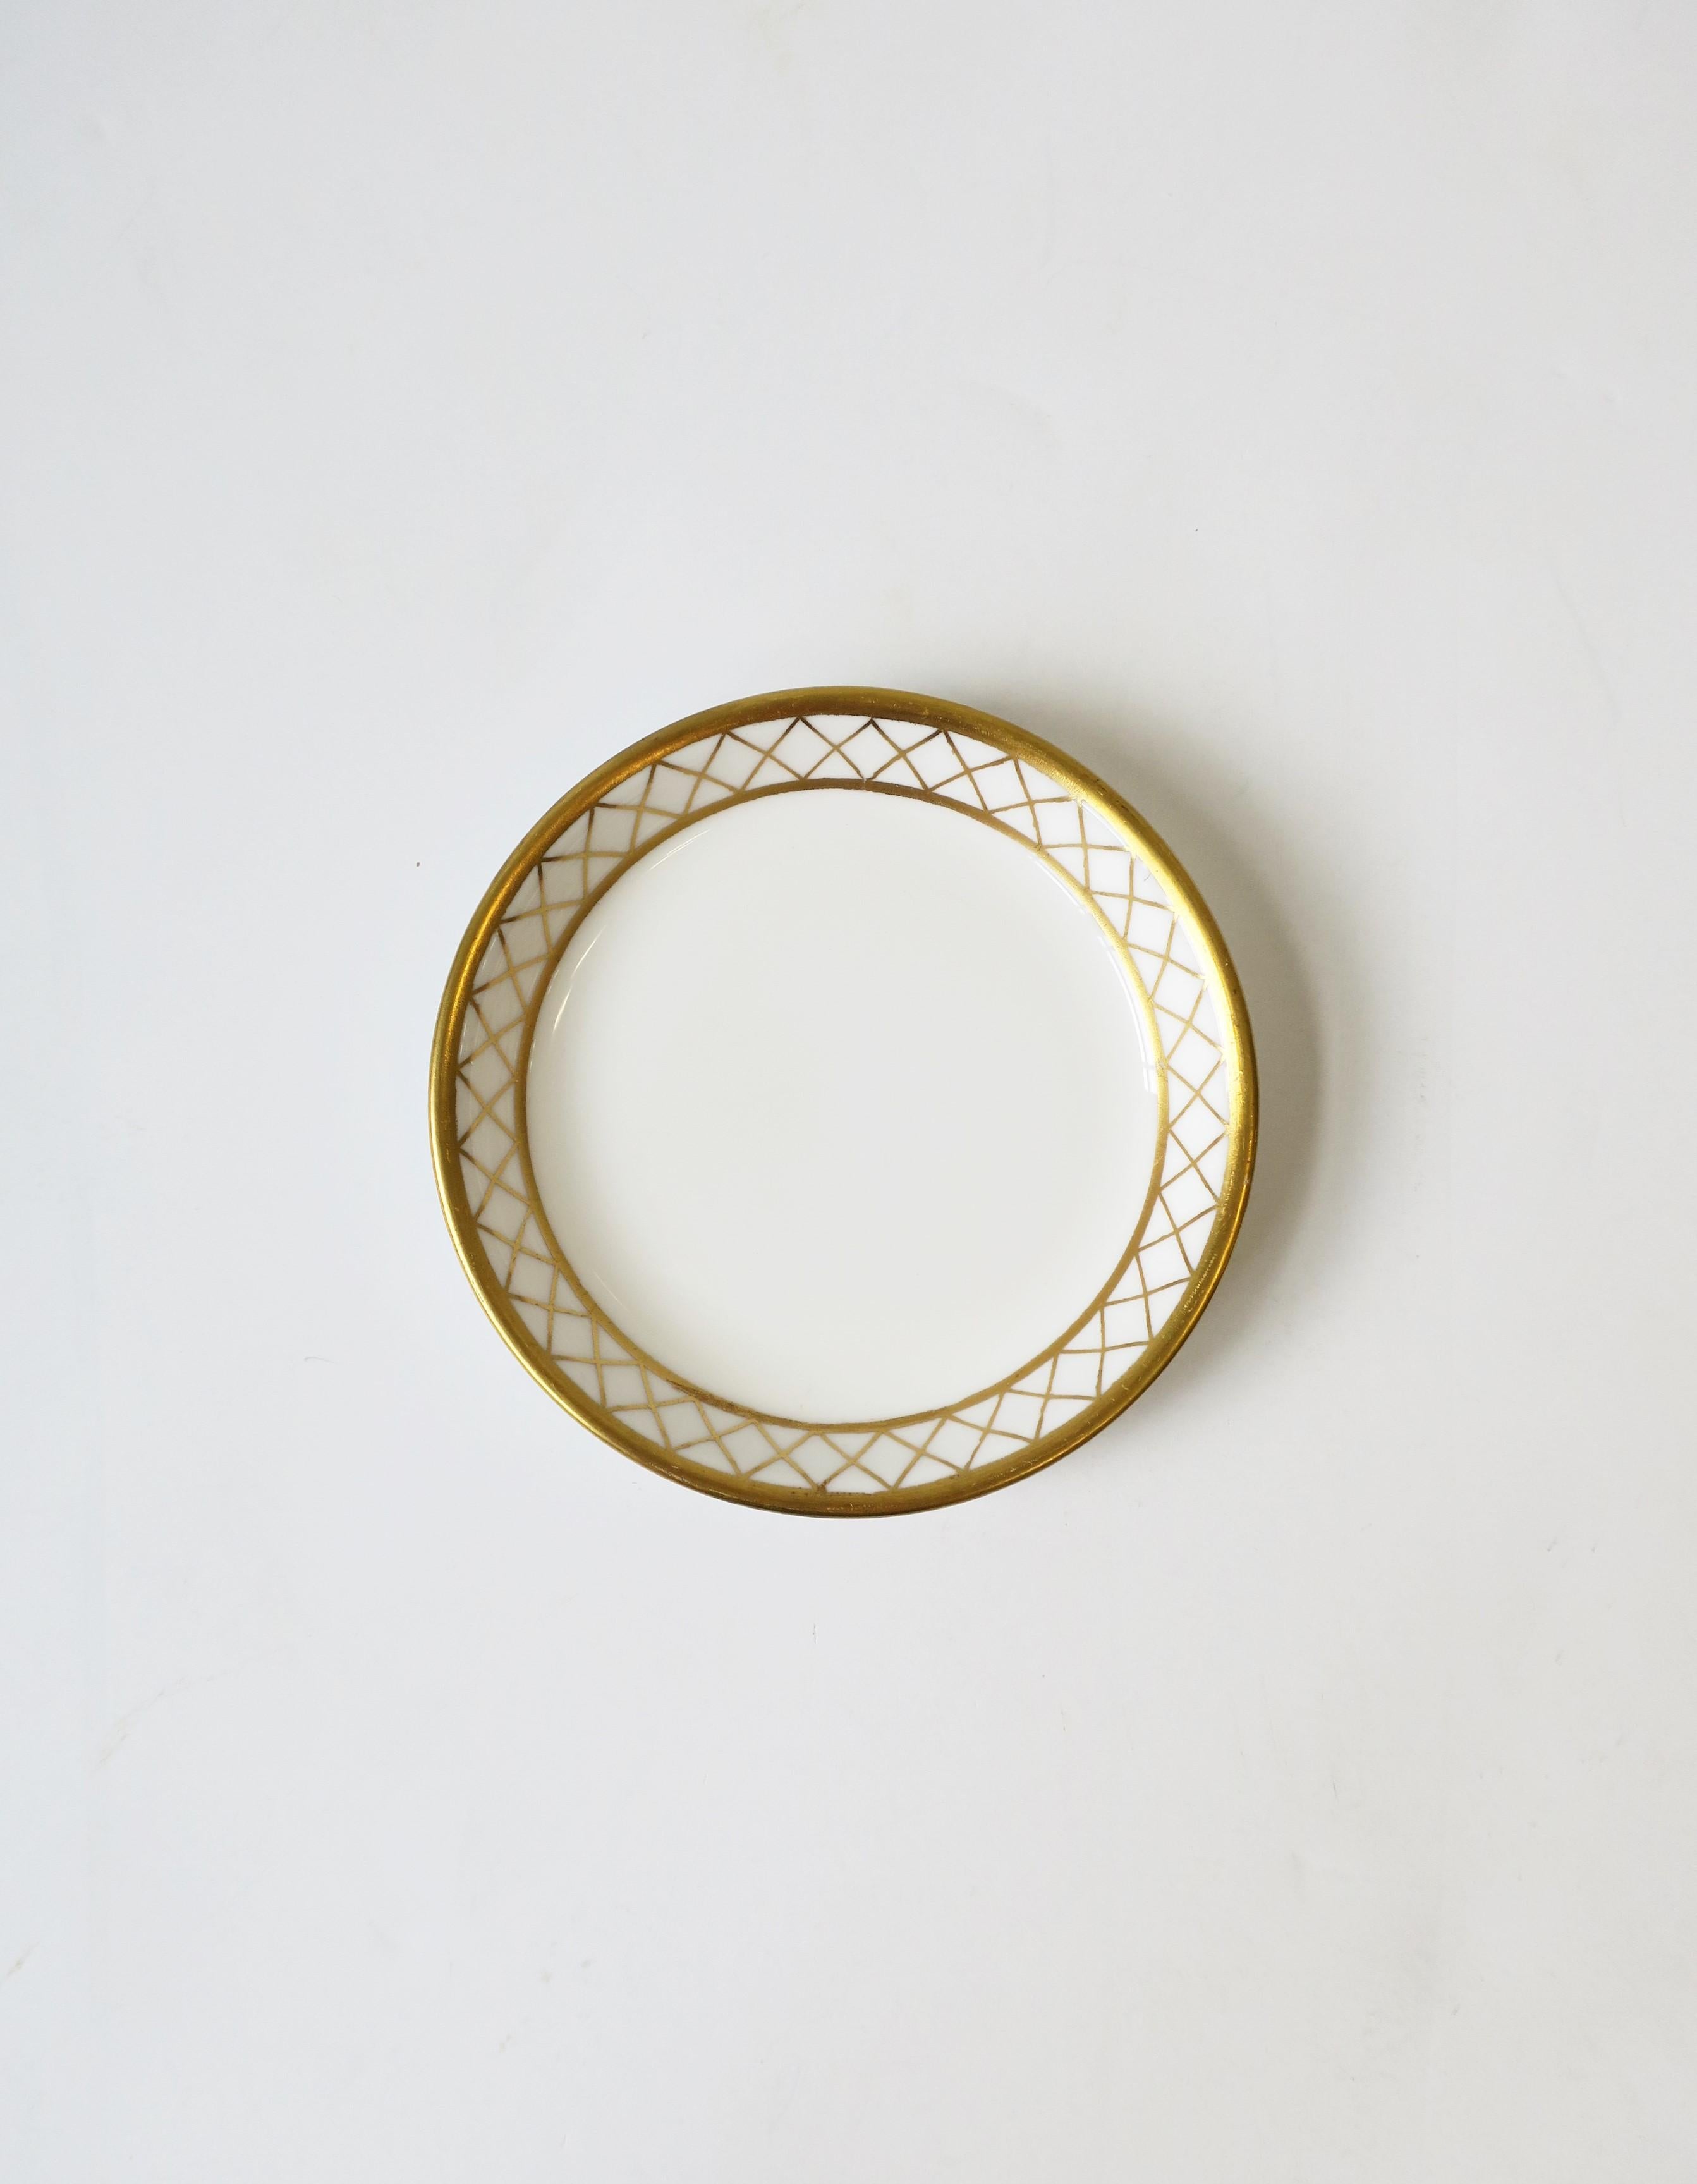 ** There are five (5) available, each sold separately, as per listing. 

A beautiful English Spode white porcelain 'jewelry' dish with a gold line-edged rim and 'x' design, circa 20th century, England. A great piece to hold jewelry (as demonstrated)